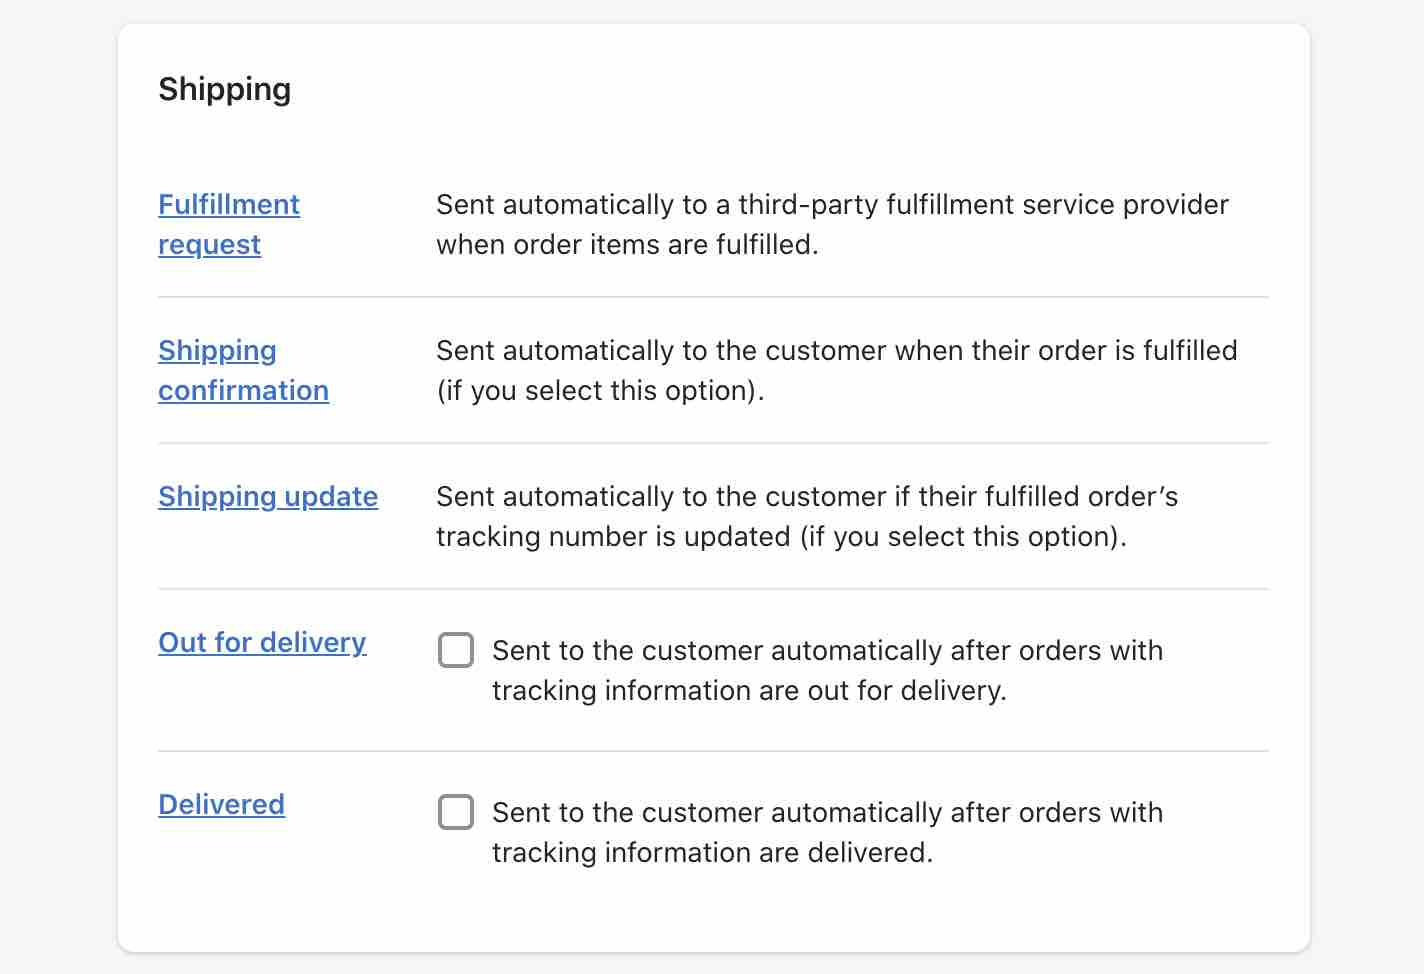 Shipping settings in Shopify with Out for delivery and delivered options unchecked